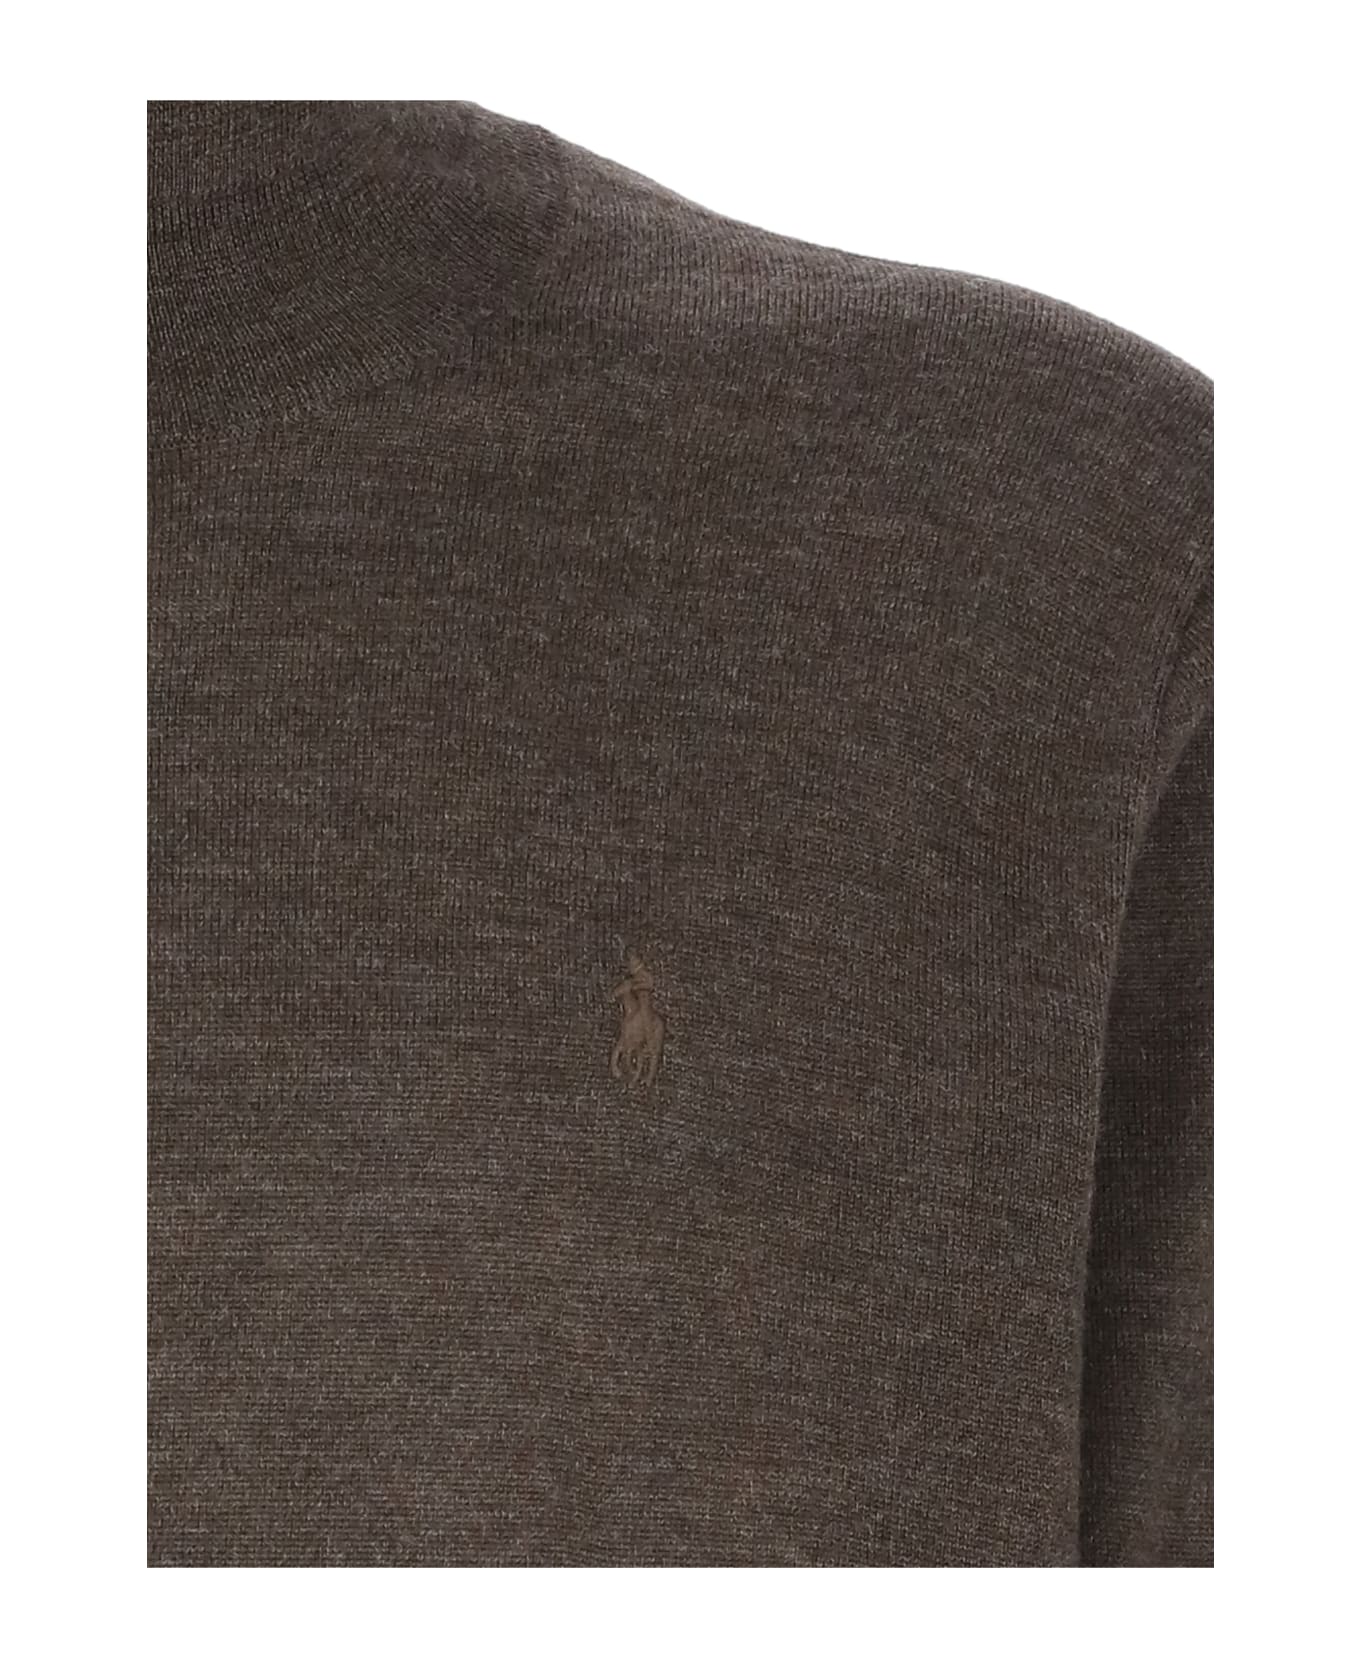 Polo Ralph Lauren Sweater With Pony Logo Top - Brown トップス